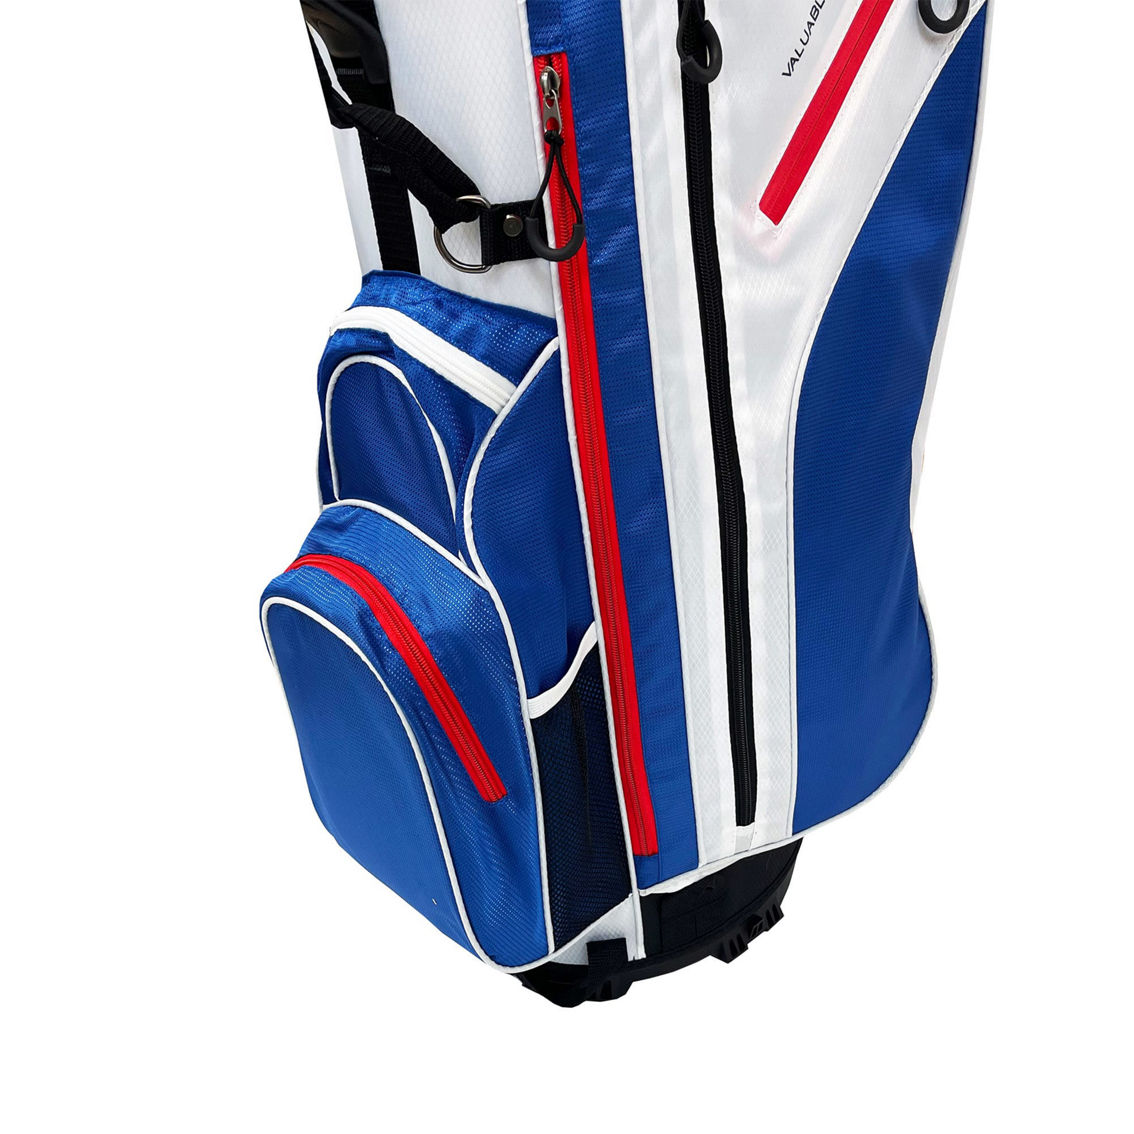 GOLF GIFTS & GALLERY HYBRID STAND BAG RED WHT BLUE - Image 5 of 5